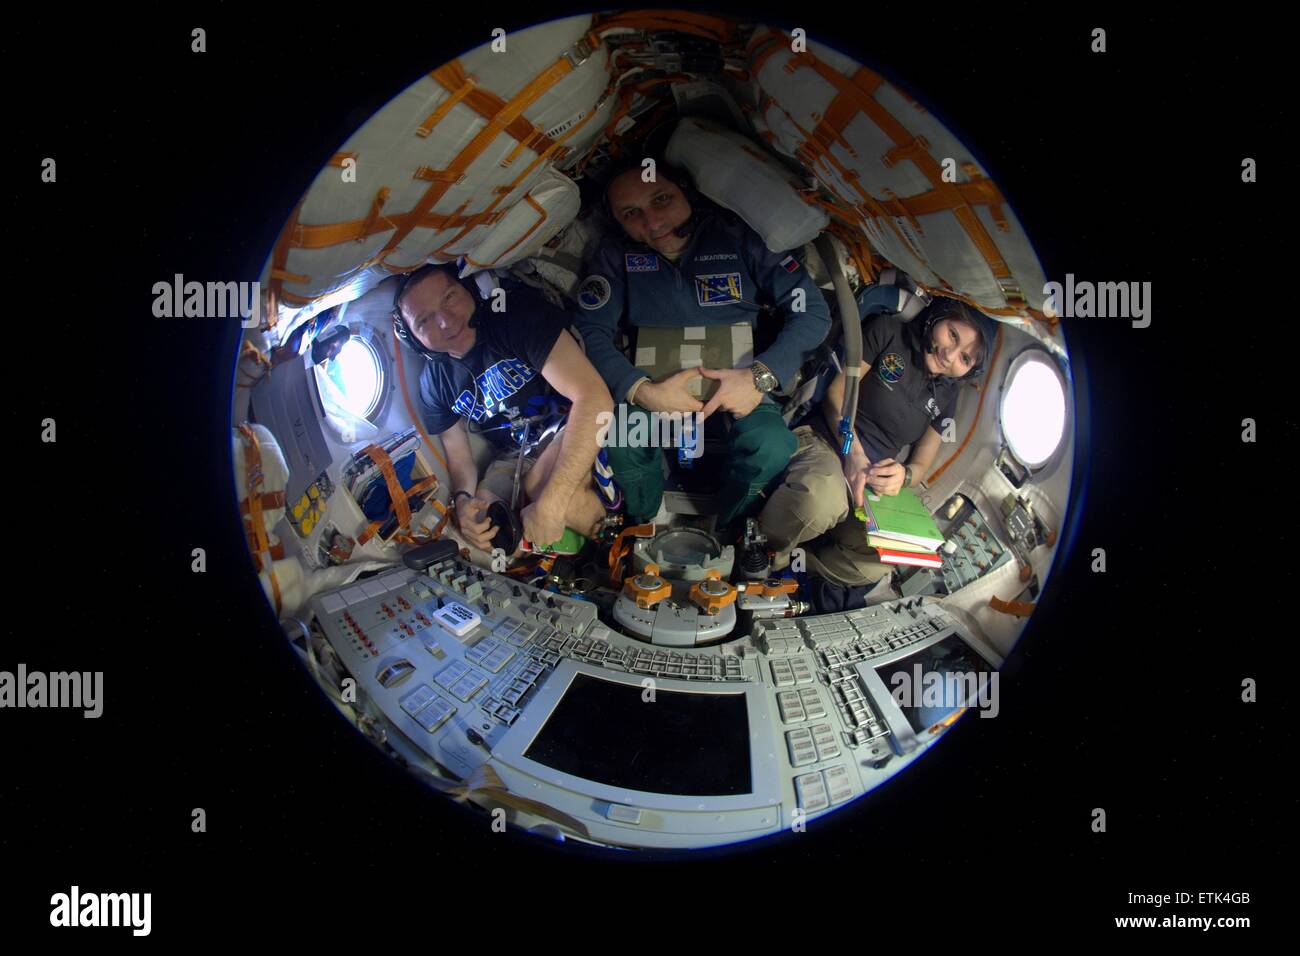 View of the Expedition 43 crew members commander Terry Virts of NASA and Cosmonaut Anton Shkaplerov of Roscosmos and Italian astronaut Samantha Cristoforetti from European Space Agency secured inside the Russian Soyuz TMA-15M spacecraft as it prepares to return to Earth June 8, 2015 from the International Space Station. The crew is returning after more than six months onboard the ISS. Stock Photo